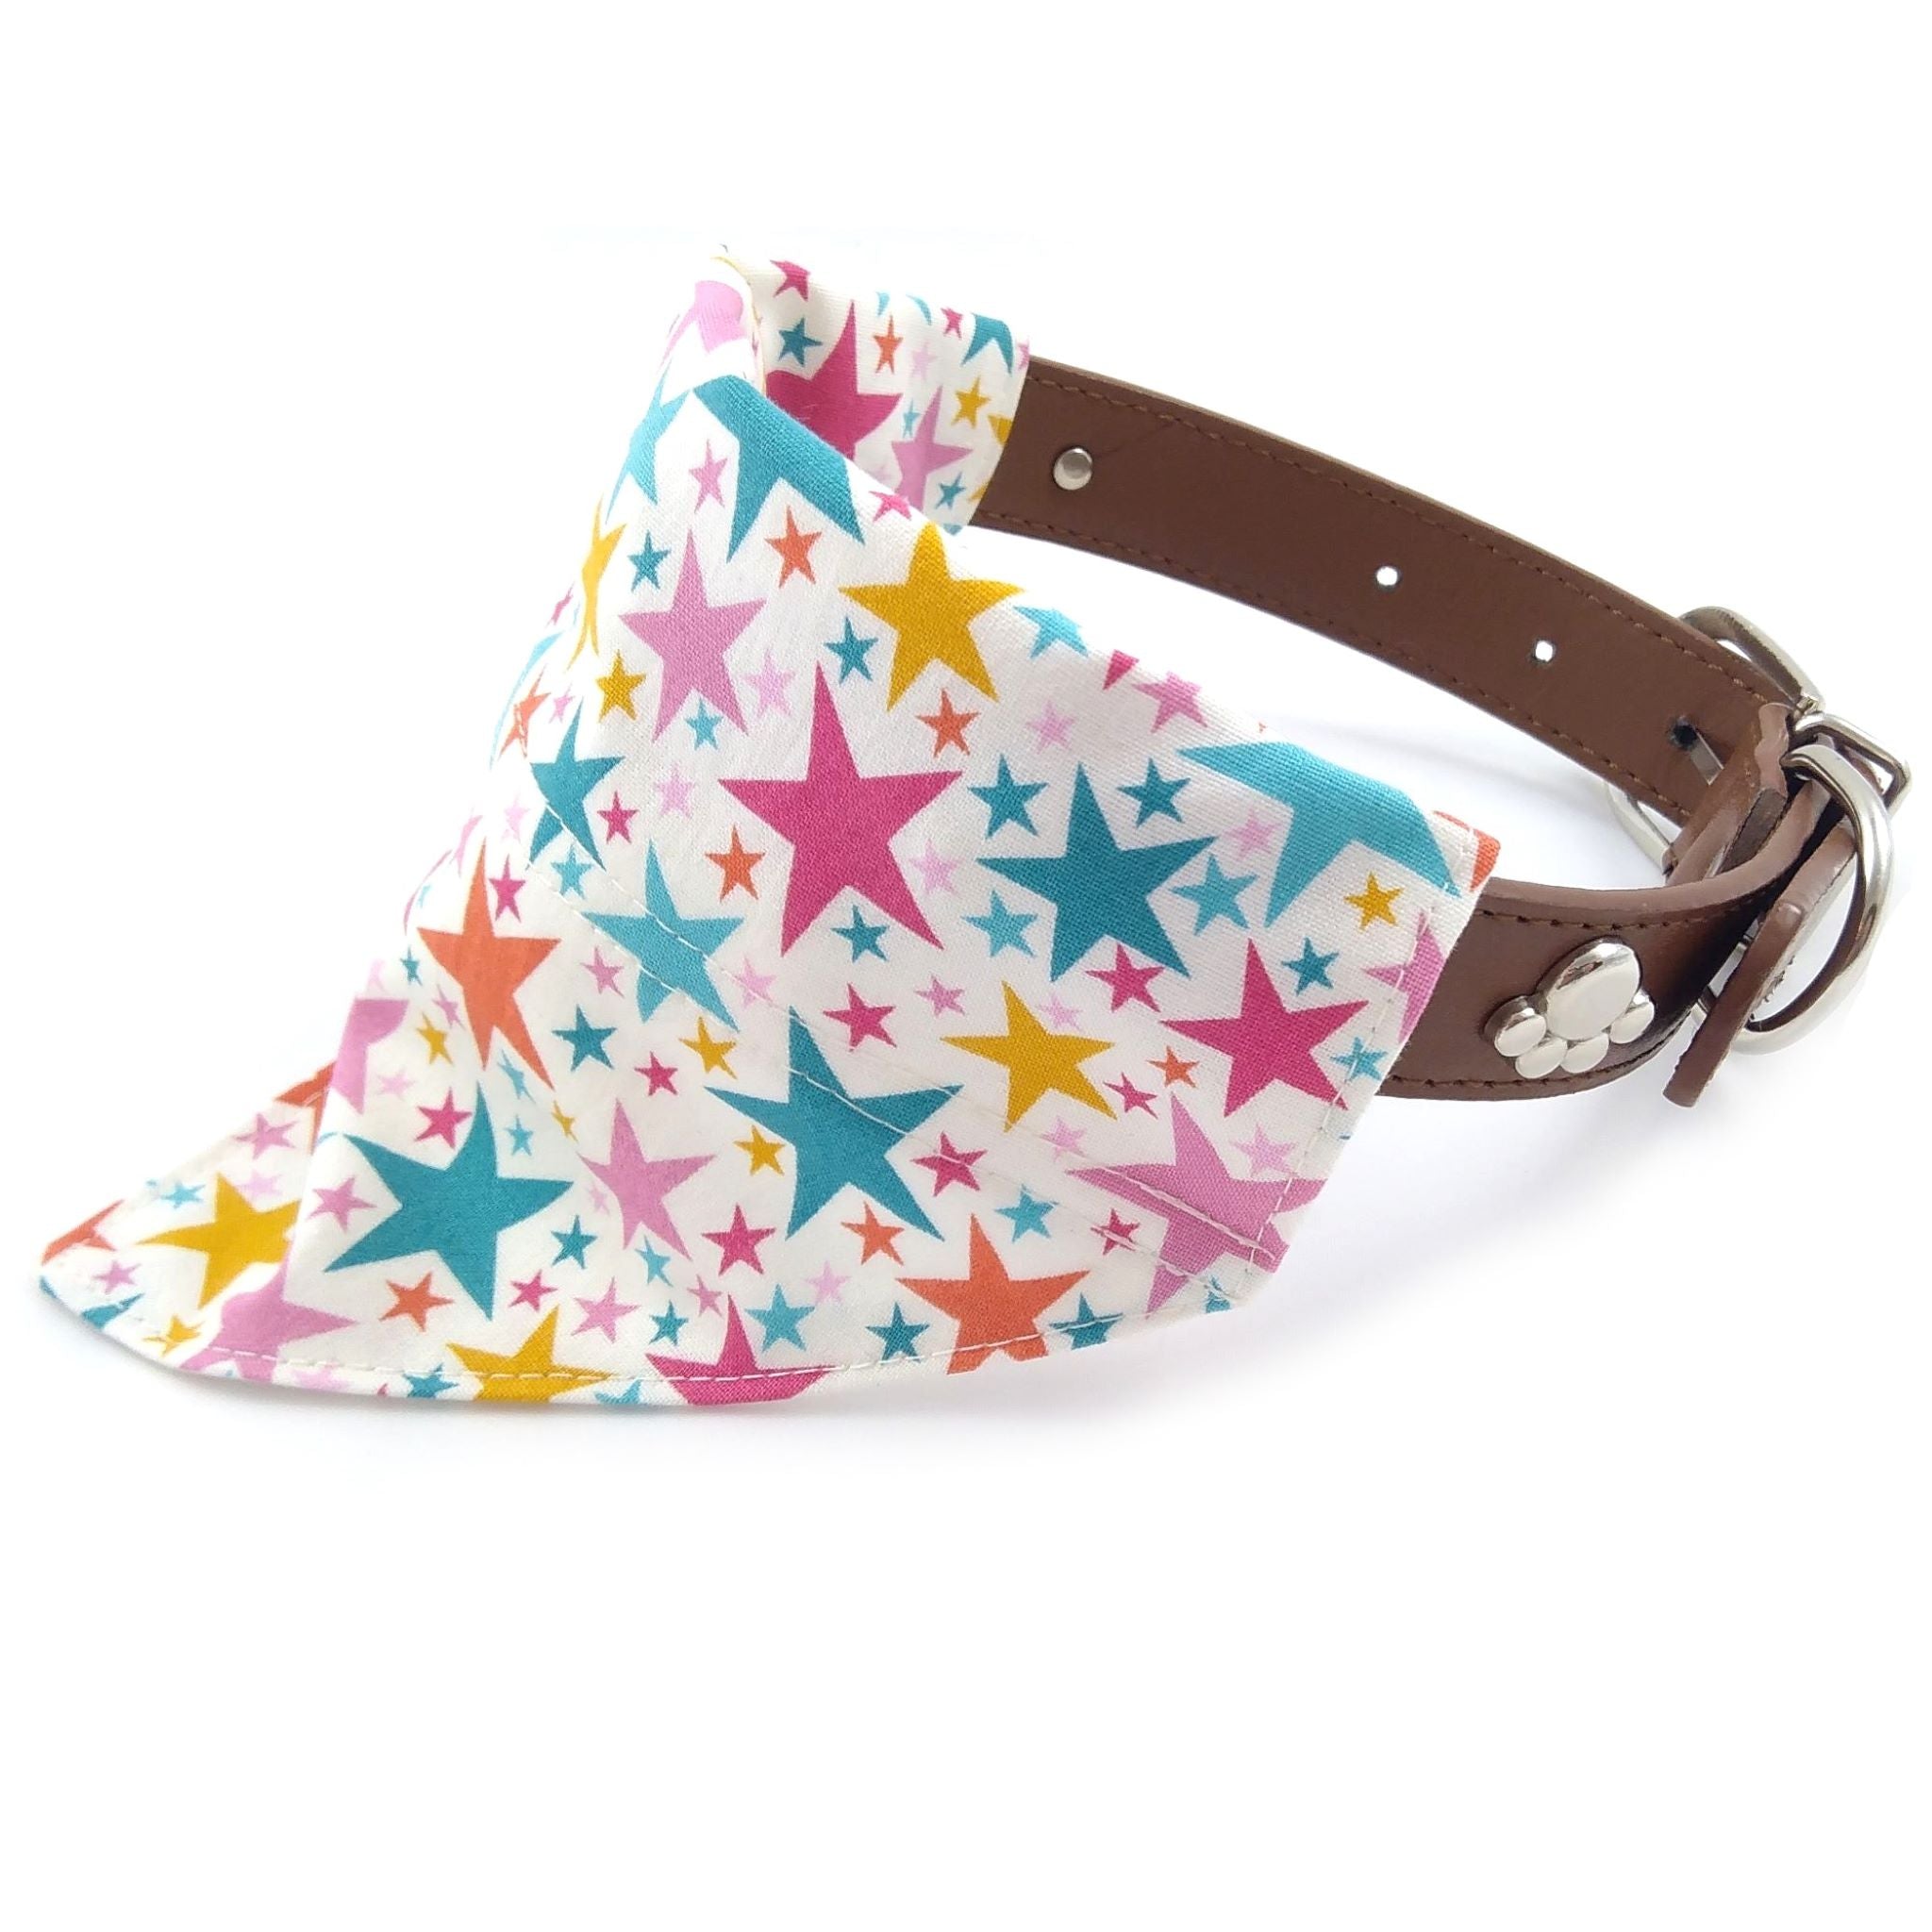 White with pastel stars dog bandana on collar from side